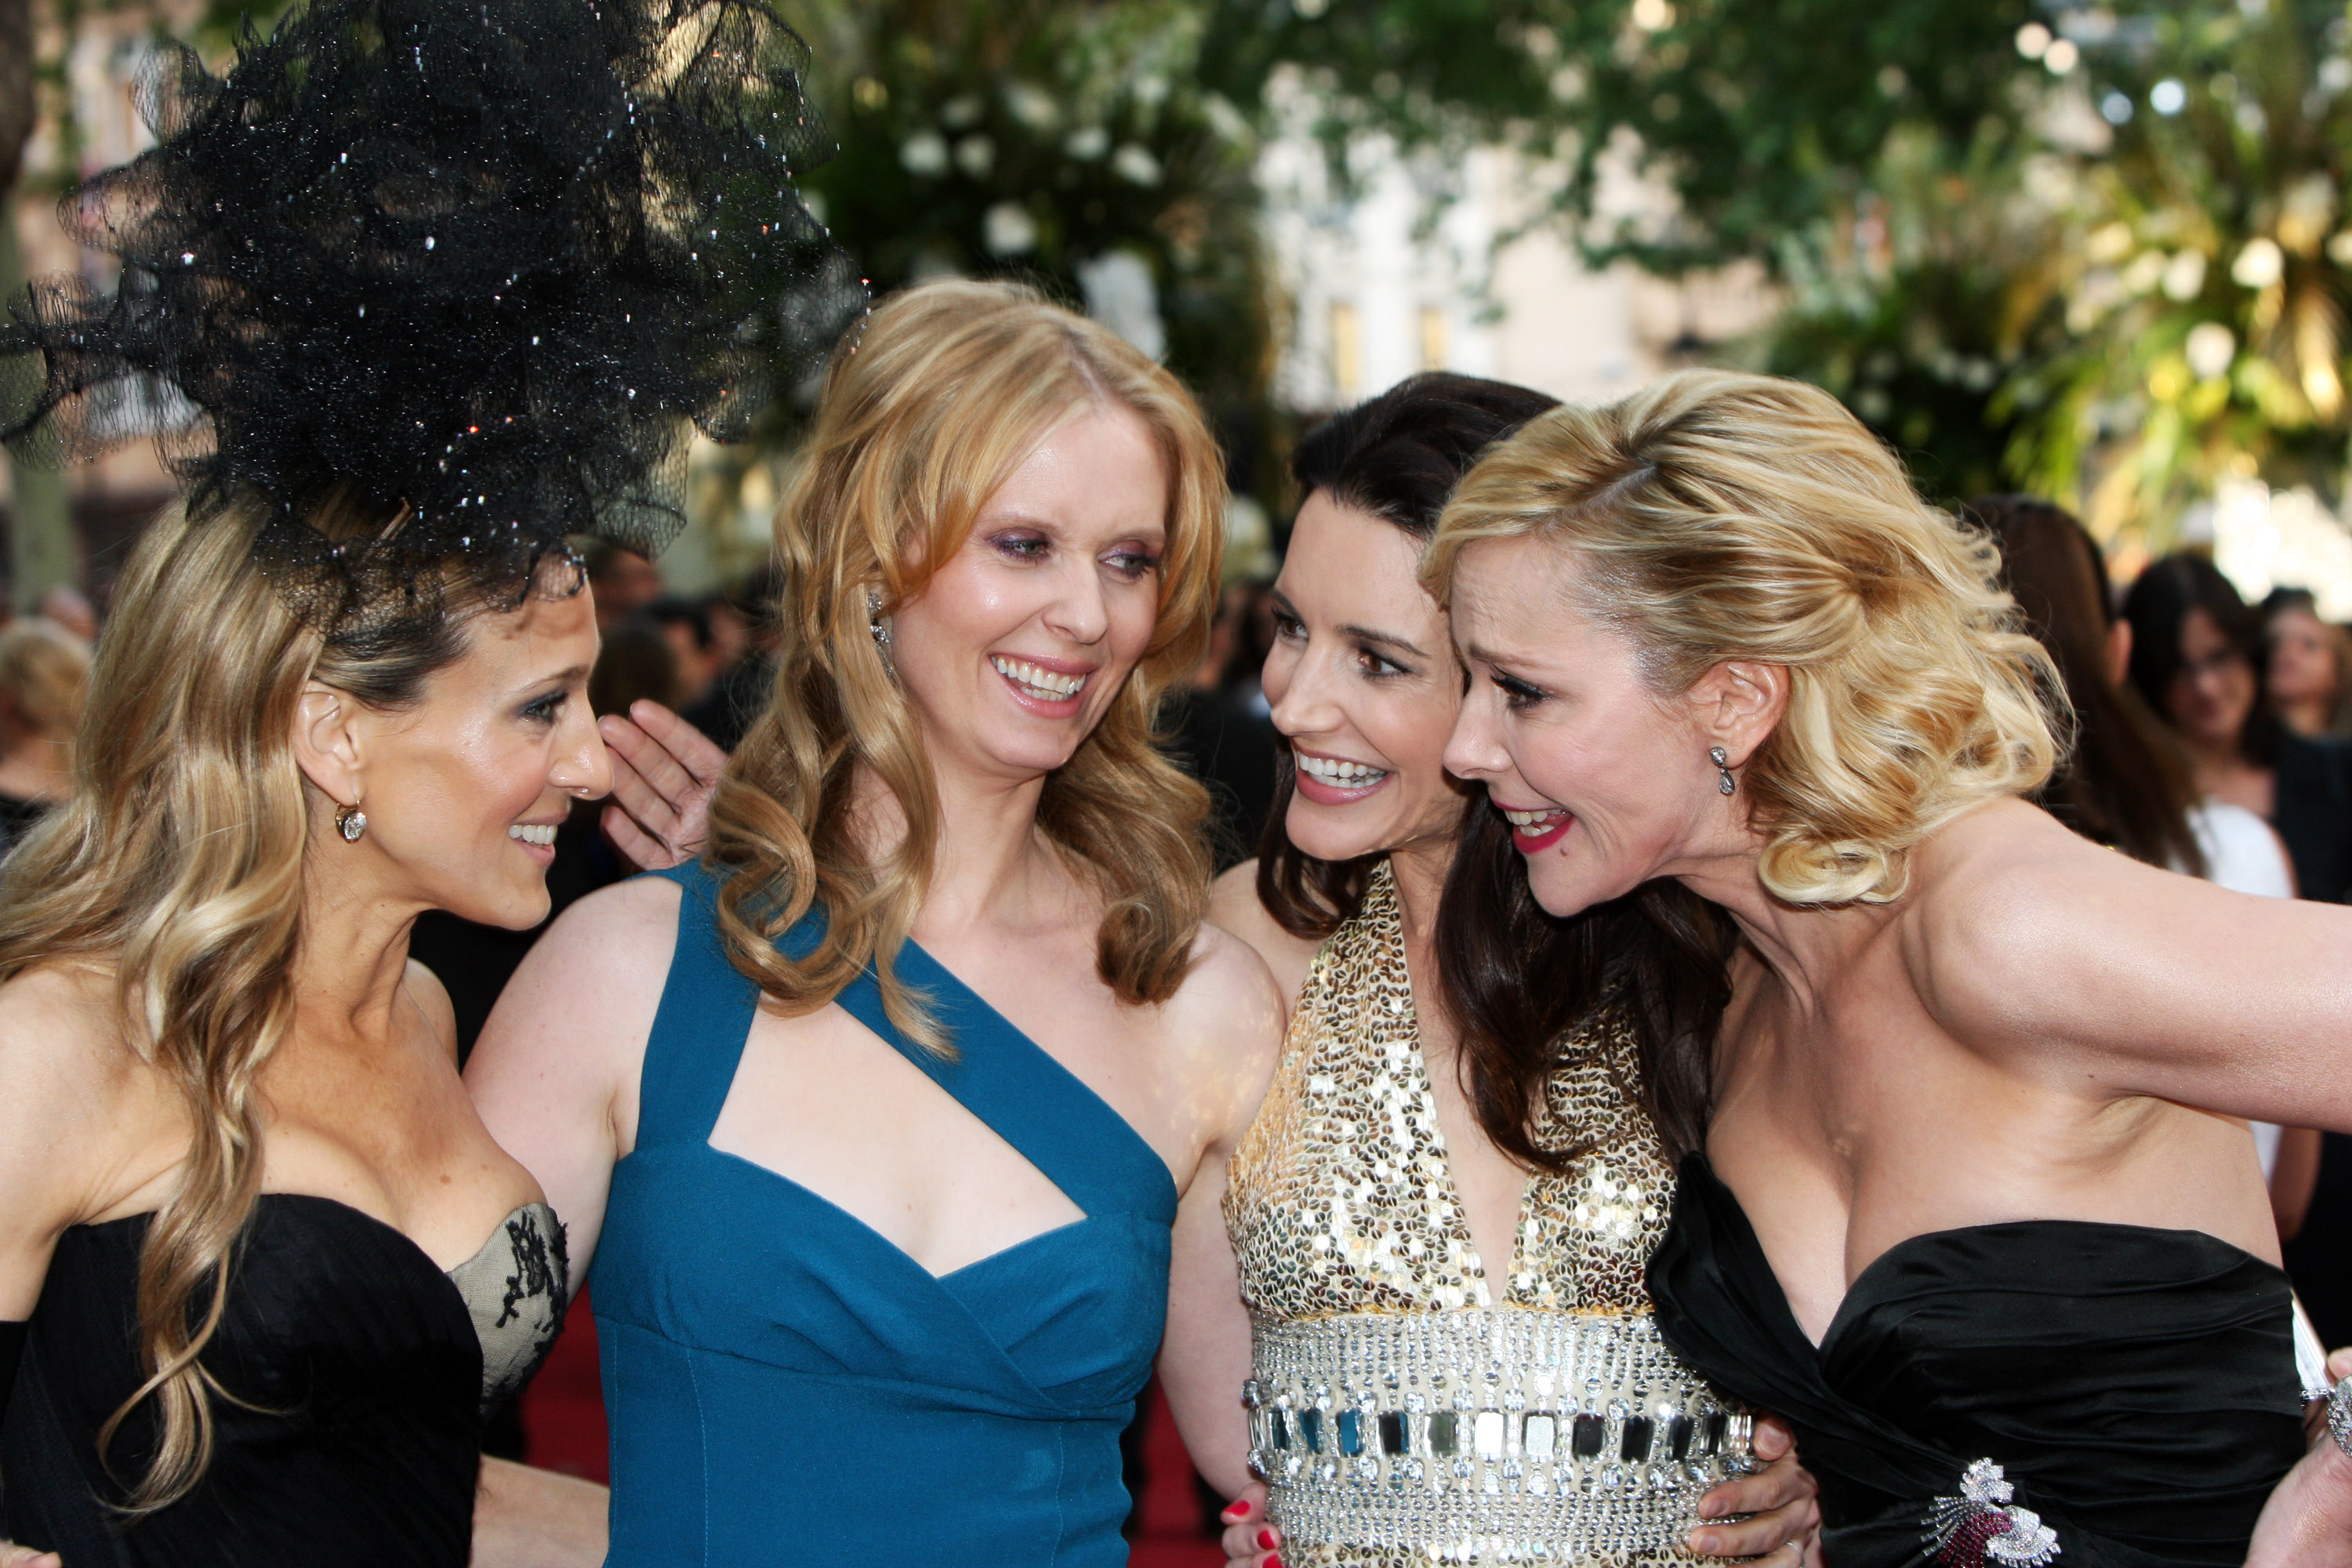 Sarah Jessica Parker, Cynthia Nixon, Kristen Davis and Kim Cattrall arrive at The UK Premiere of 'Sex And The City 2'